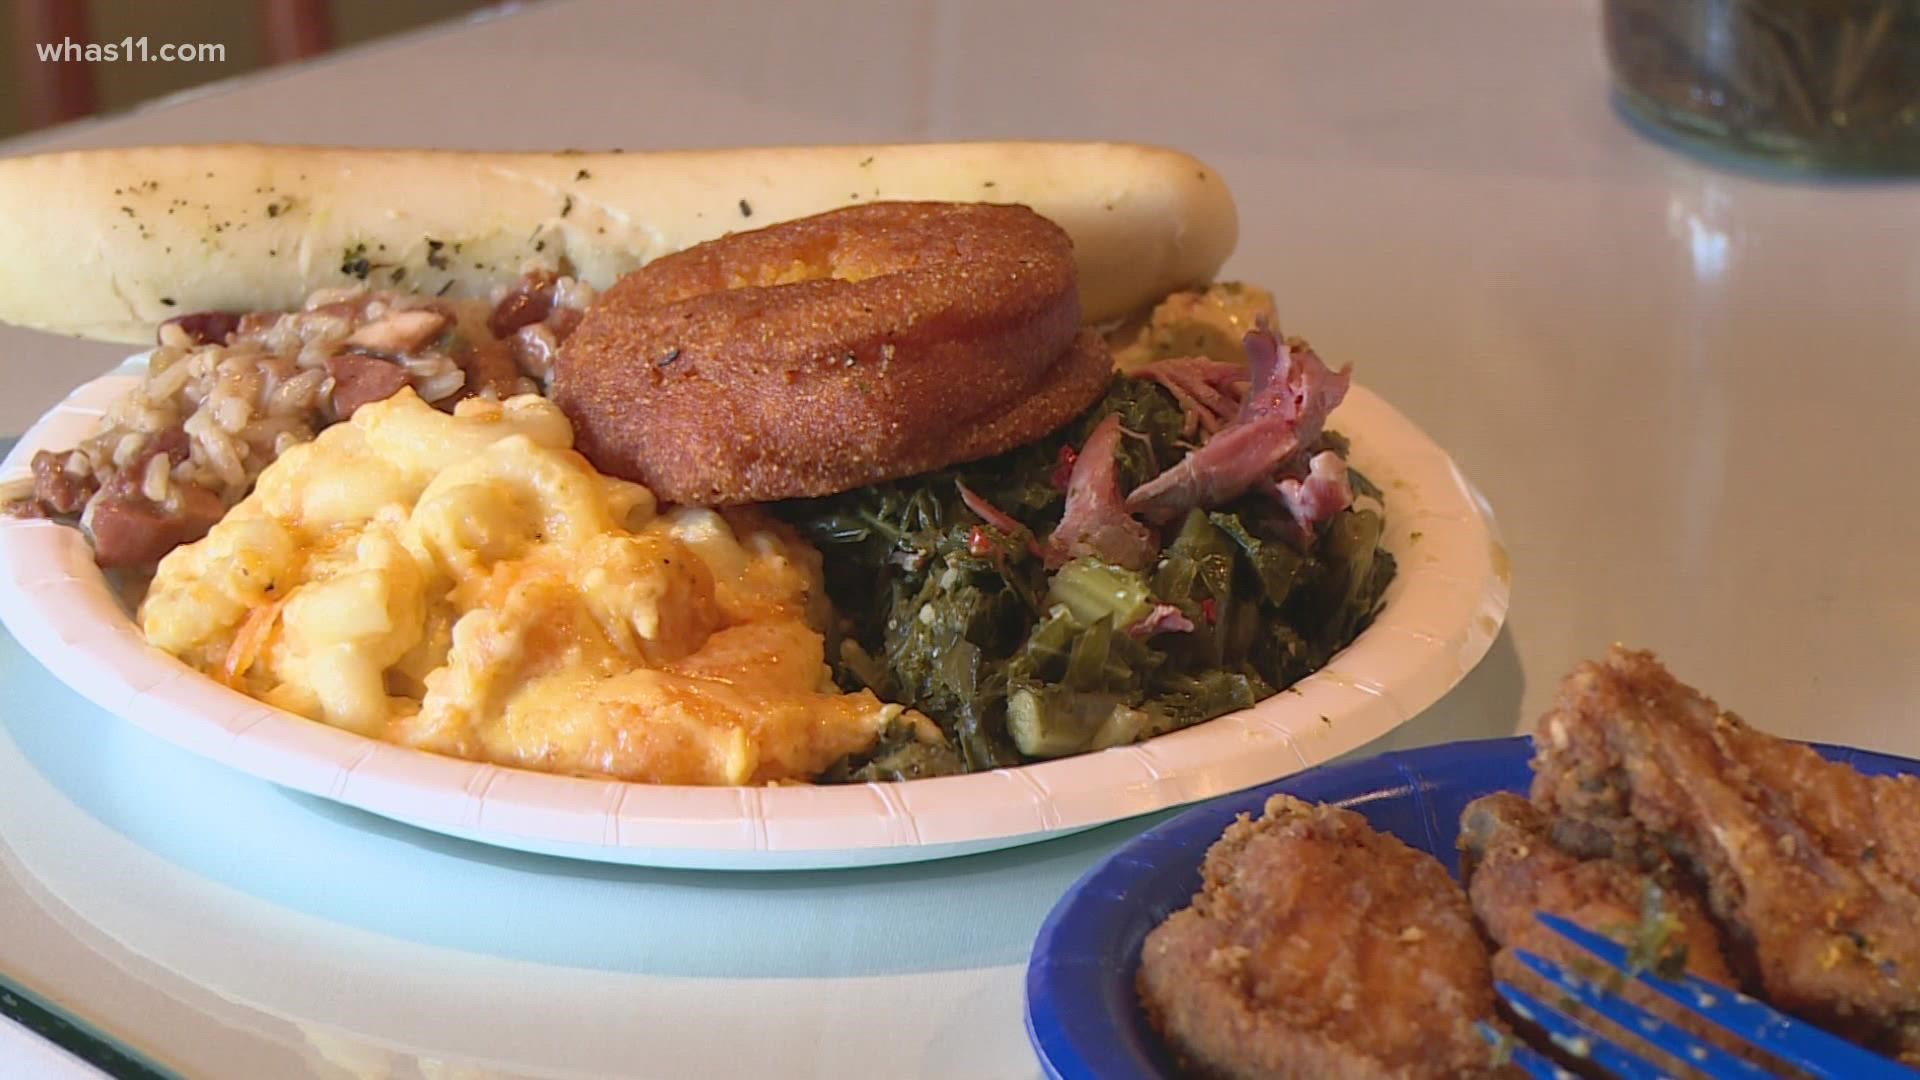 Huge Impact held its soft opening at the former Pesto's site at 5th & Chestnut. The Indianapolis-based restaurant offers their take on classic soul food dishes.